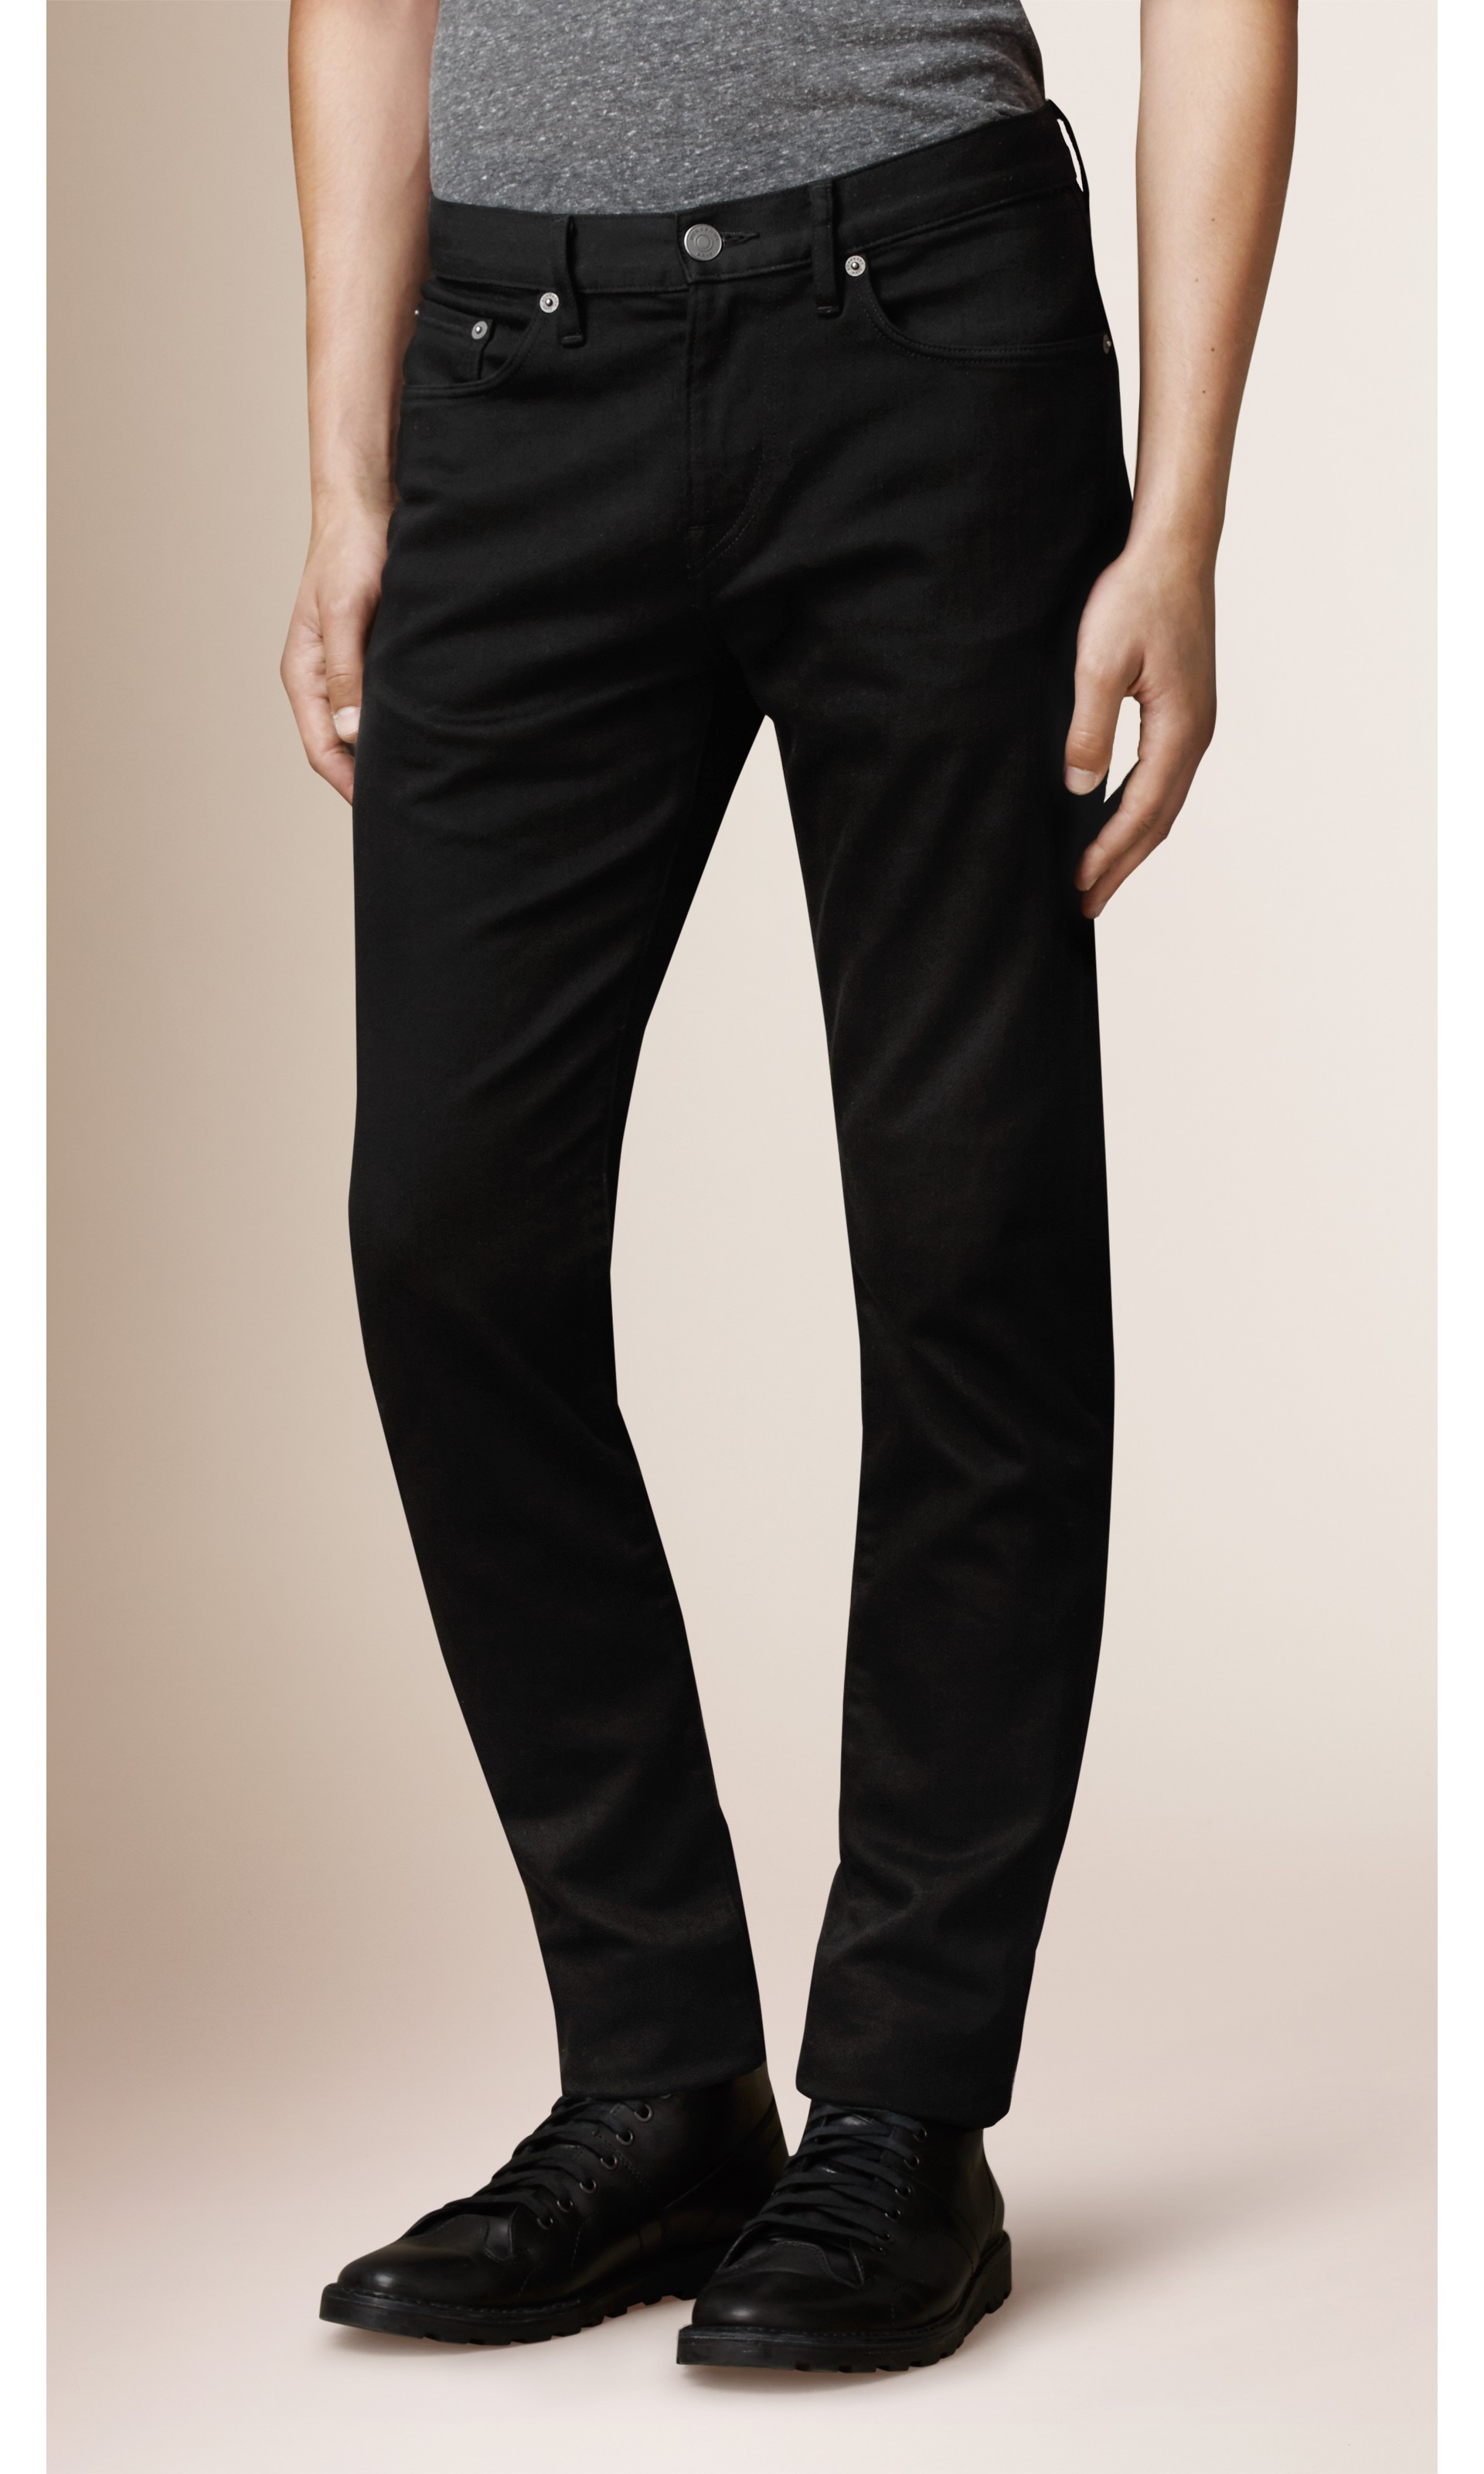 Straight Fit Yarn Dyed Jeans in Black - Men | Burberry United States